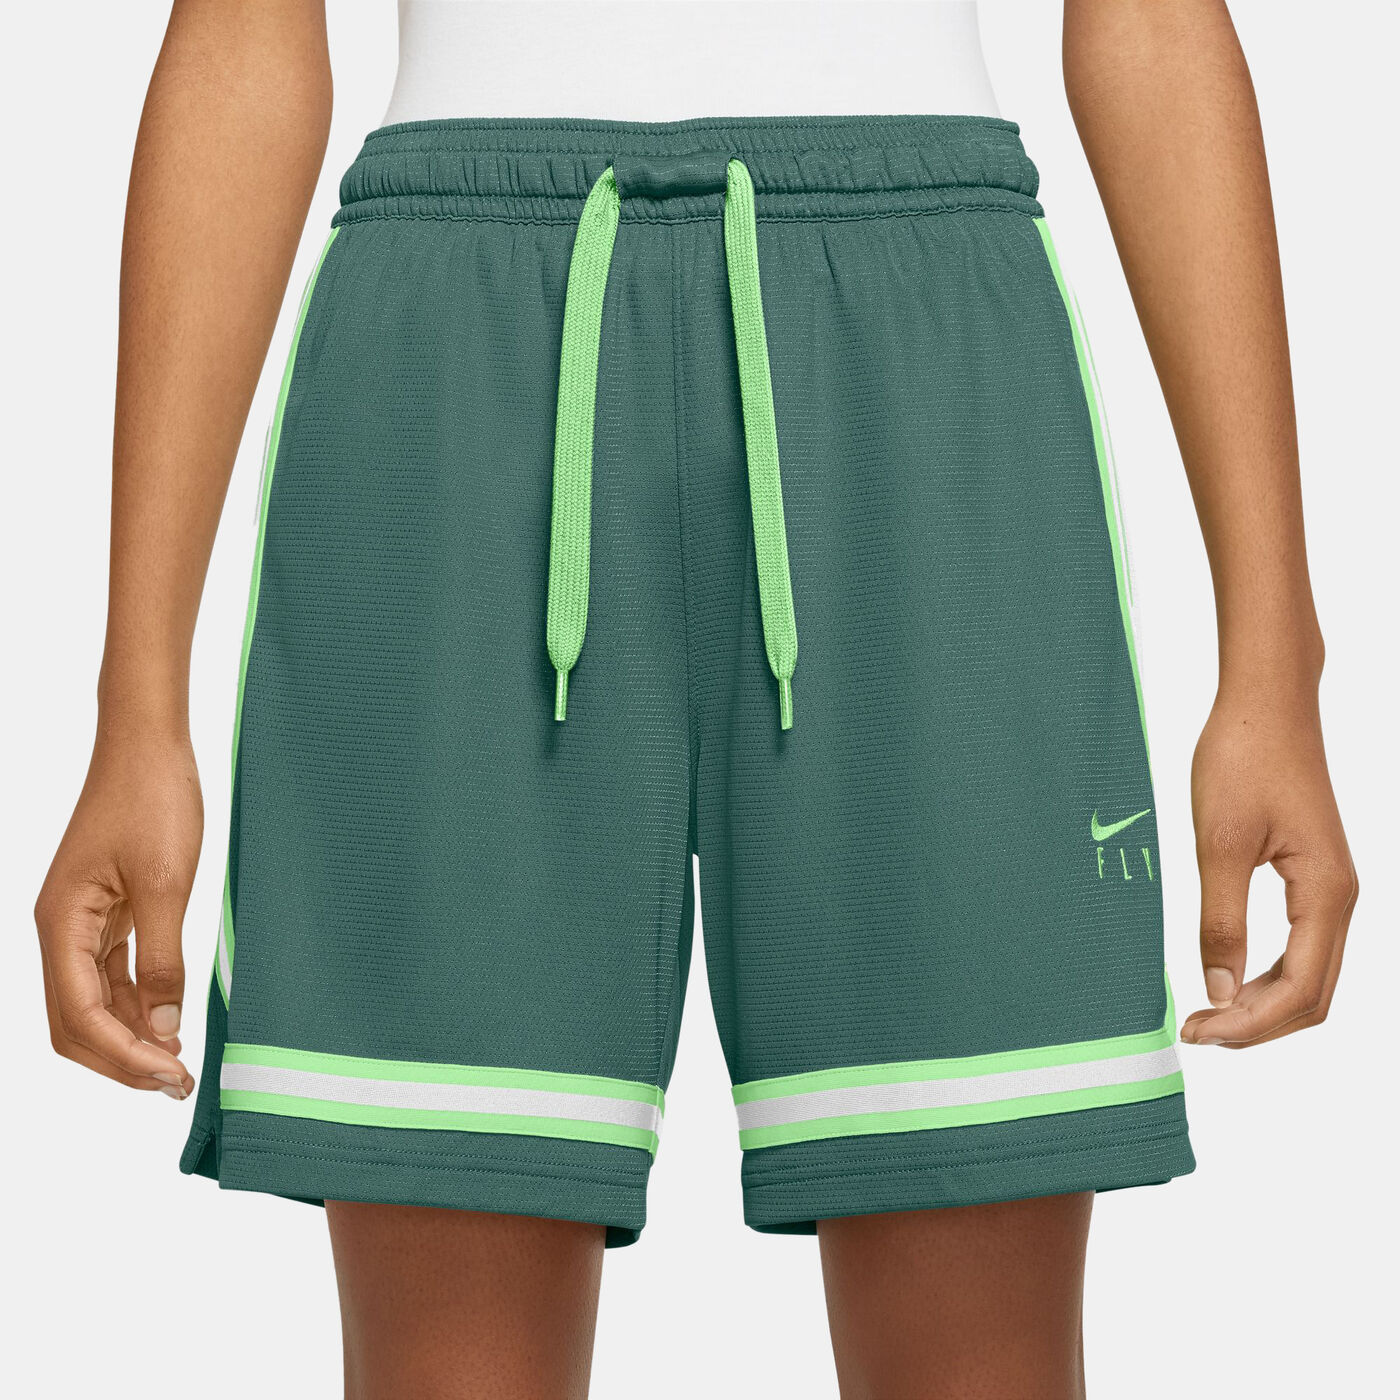 Women's Fly Crossover Basketball Shorts